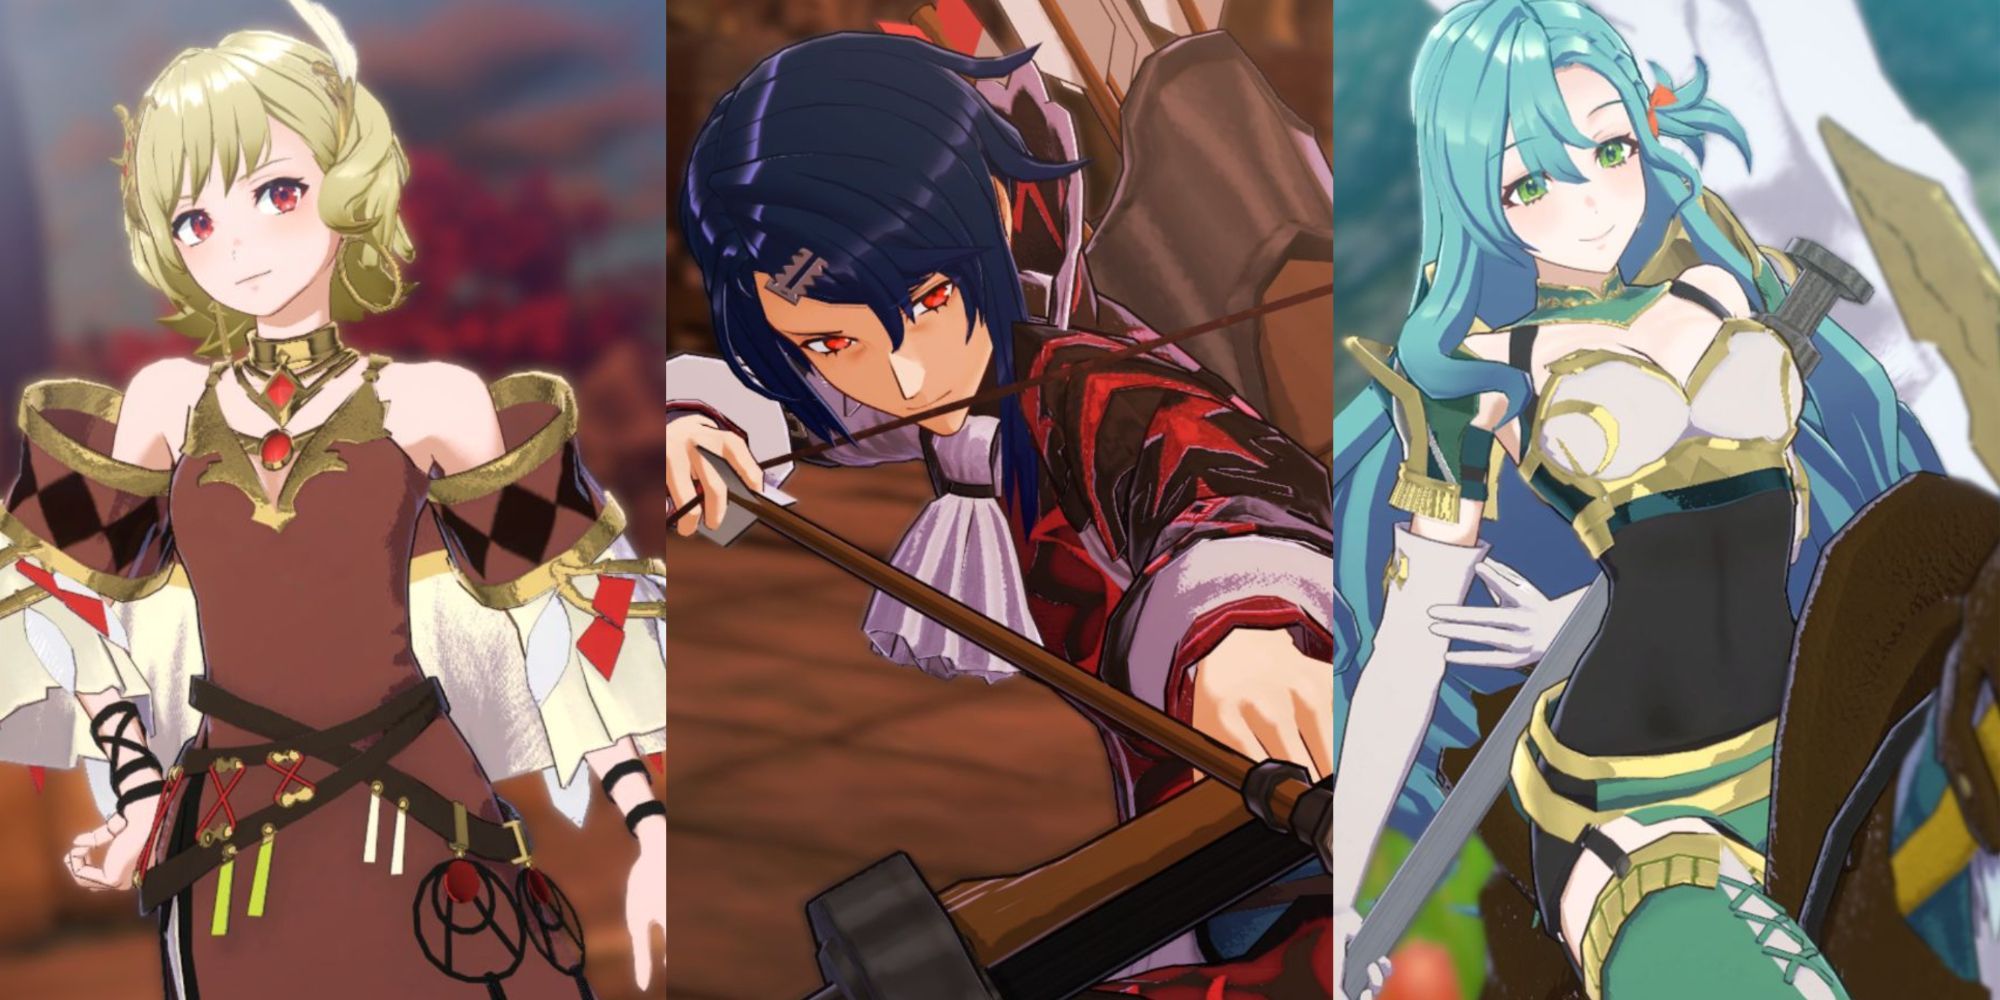 Fire Emblem Engage - Citrinne, (left) Alcryst, (middle) and Chloe (right) from their pictures in the ally notebook